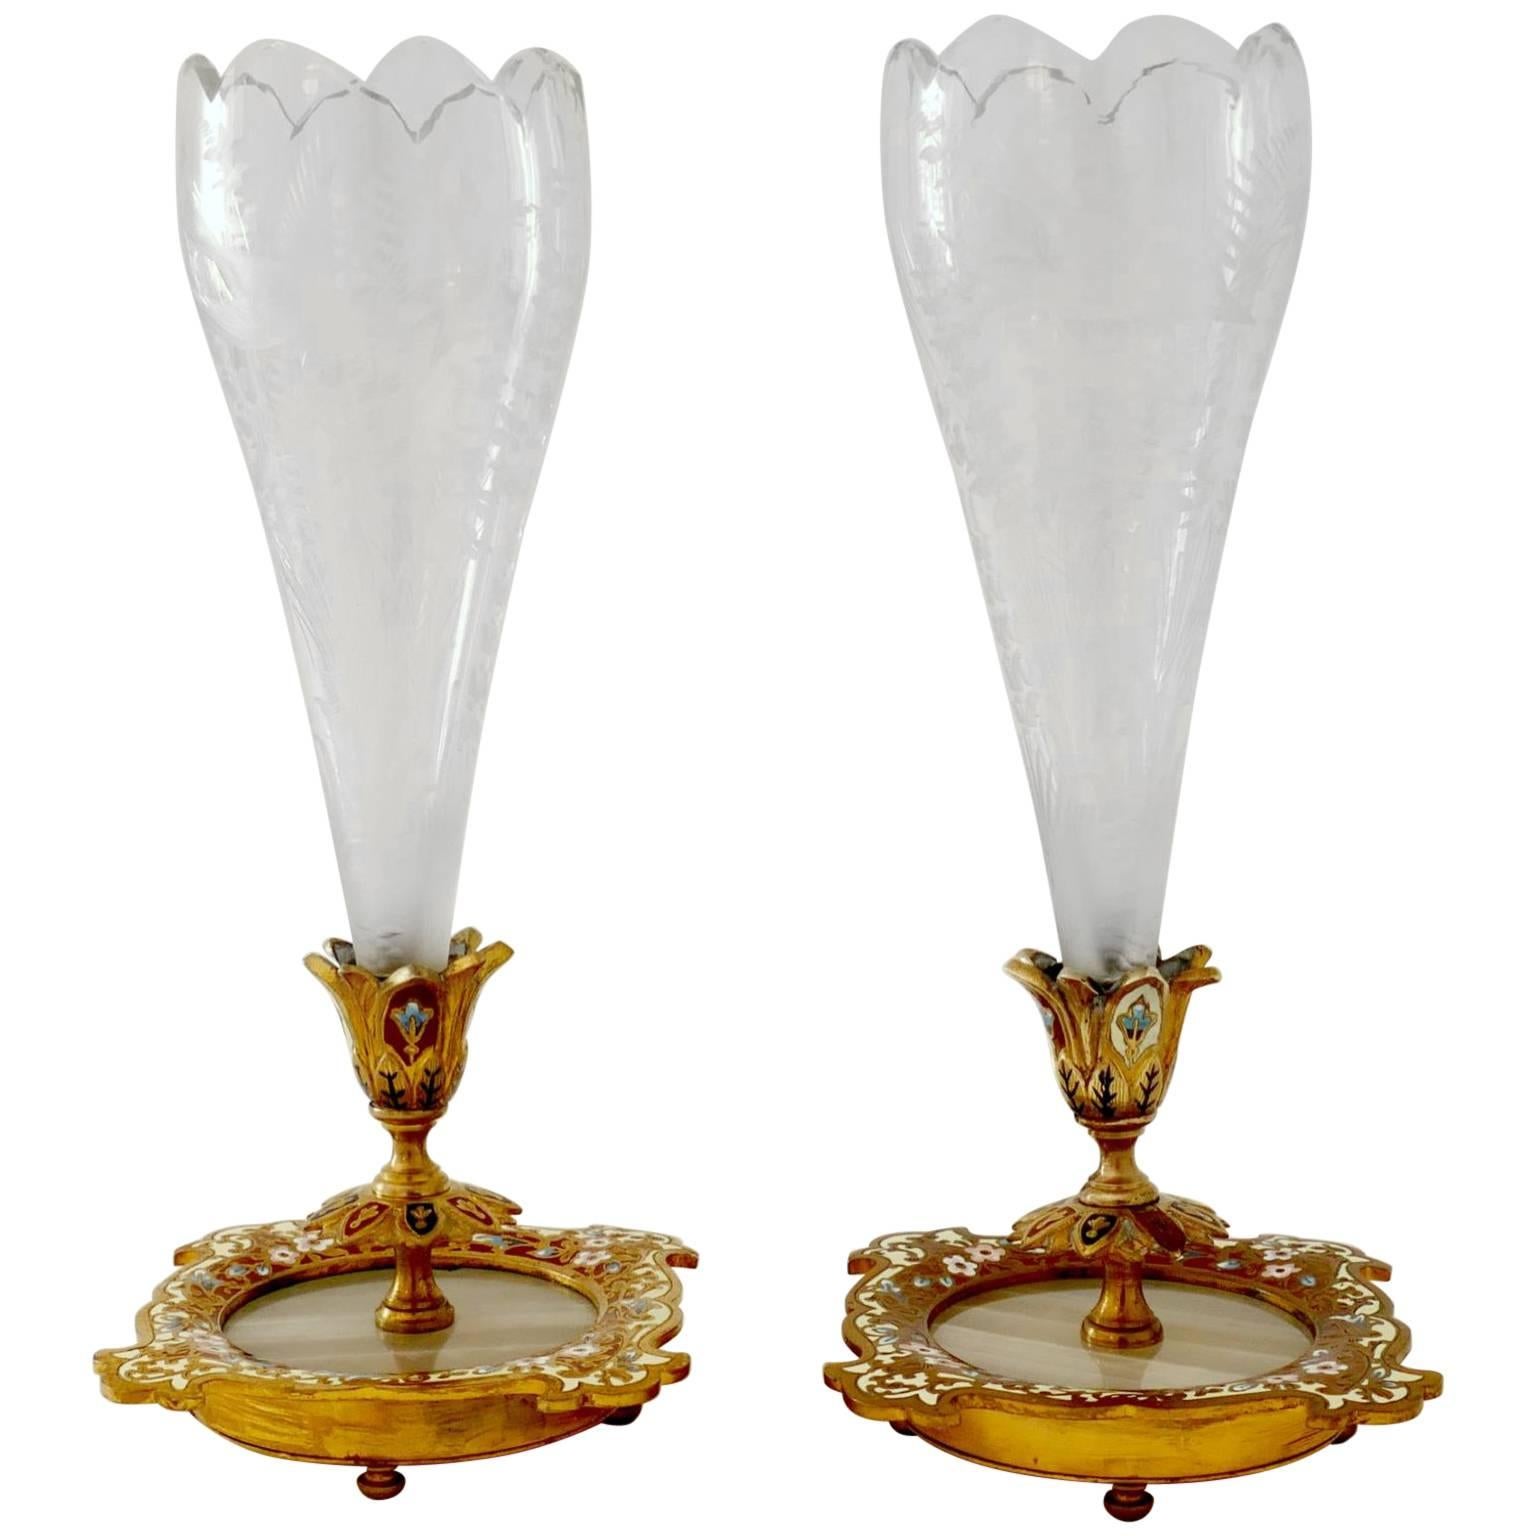 Rare Pair Antique French Champlevé Enamel Baccarat Crystal Epergne/Vases